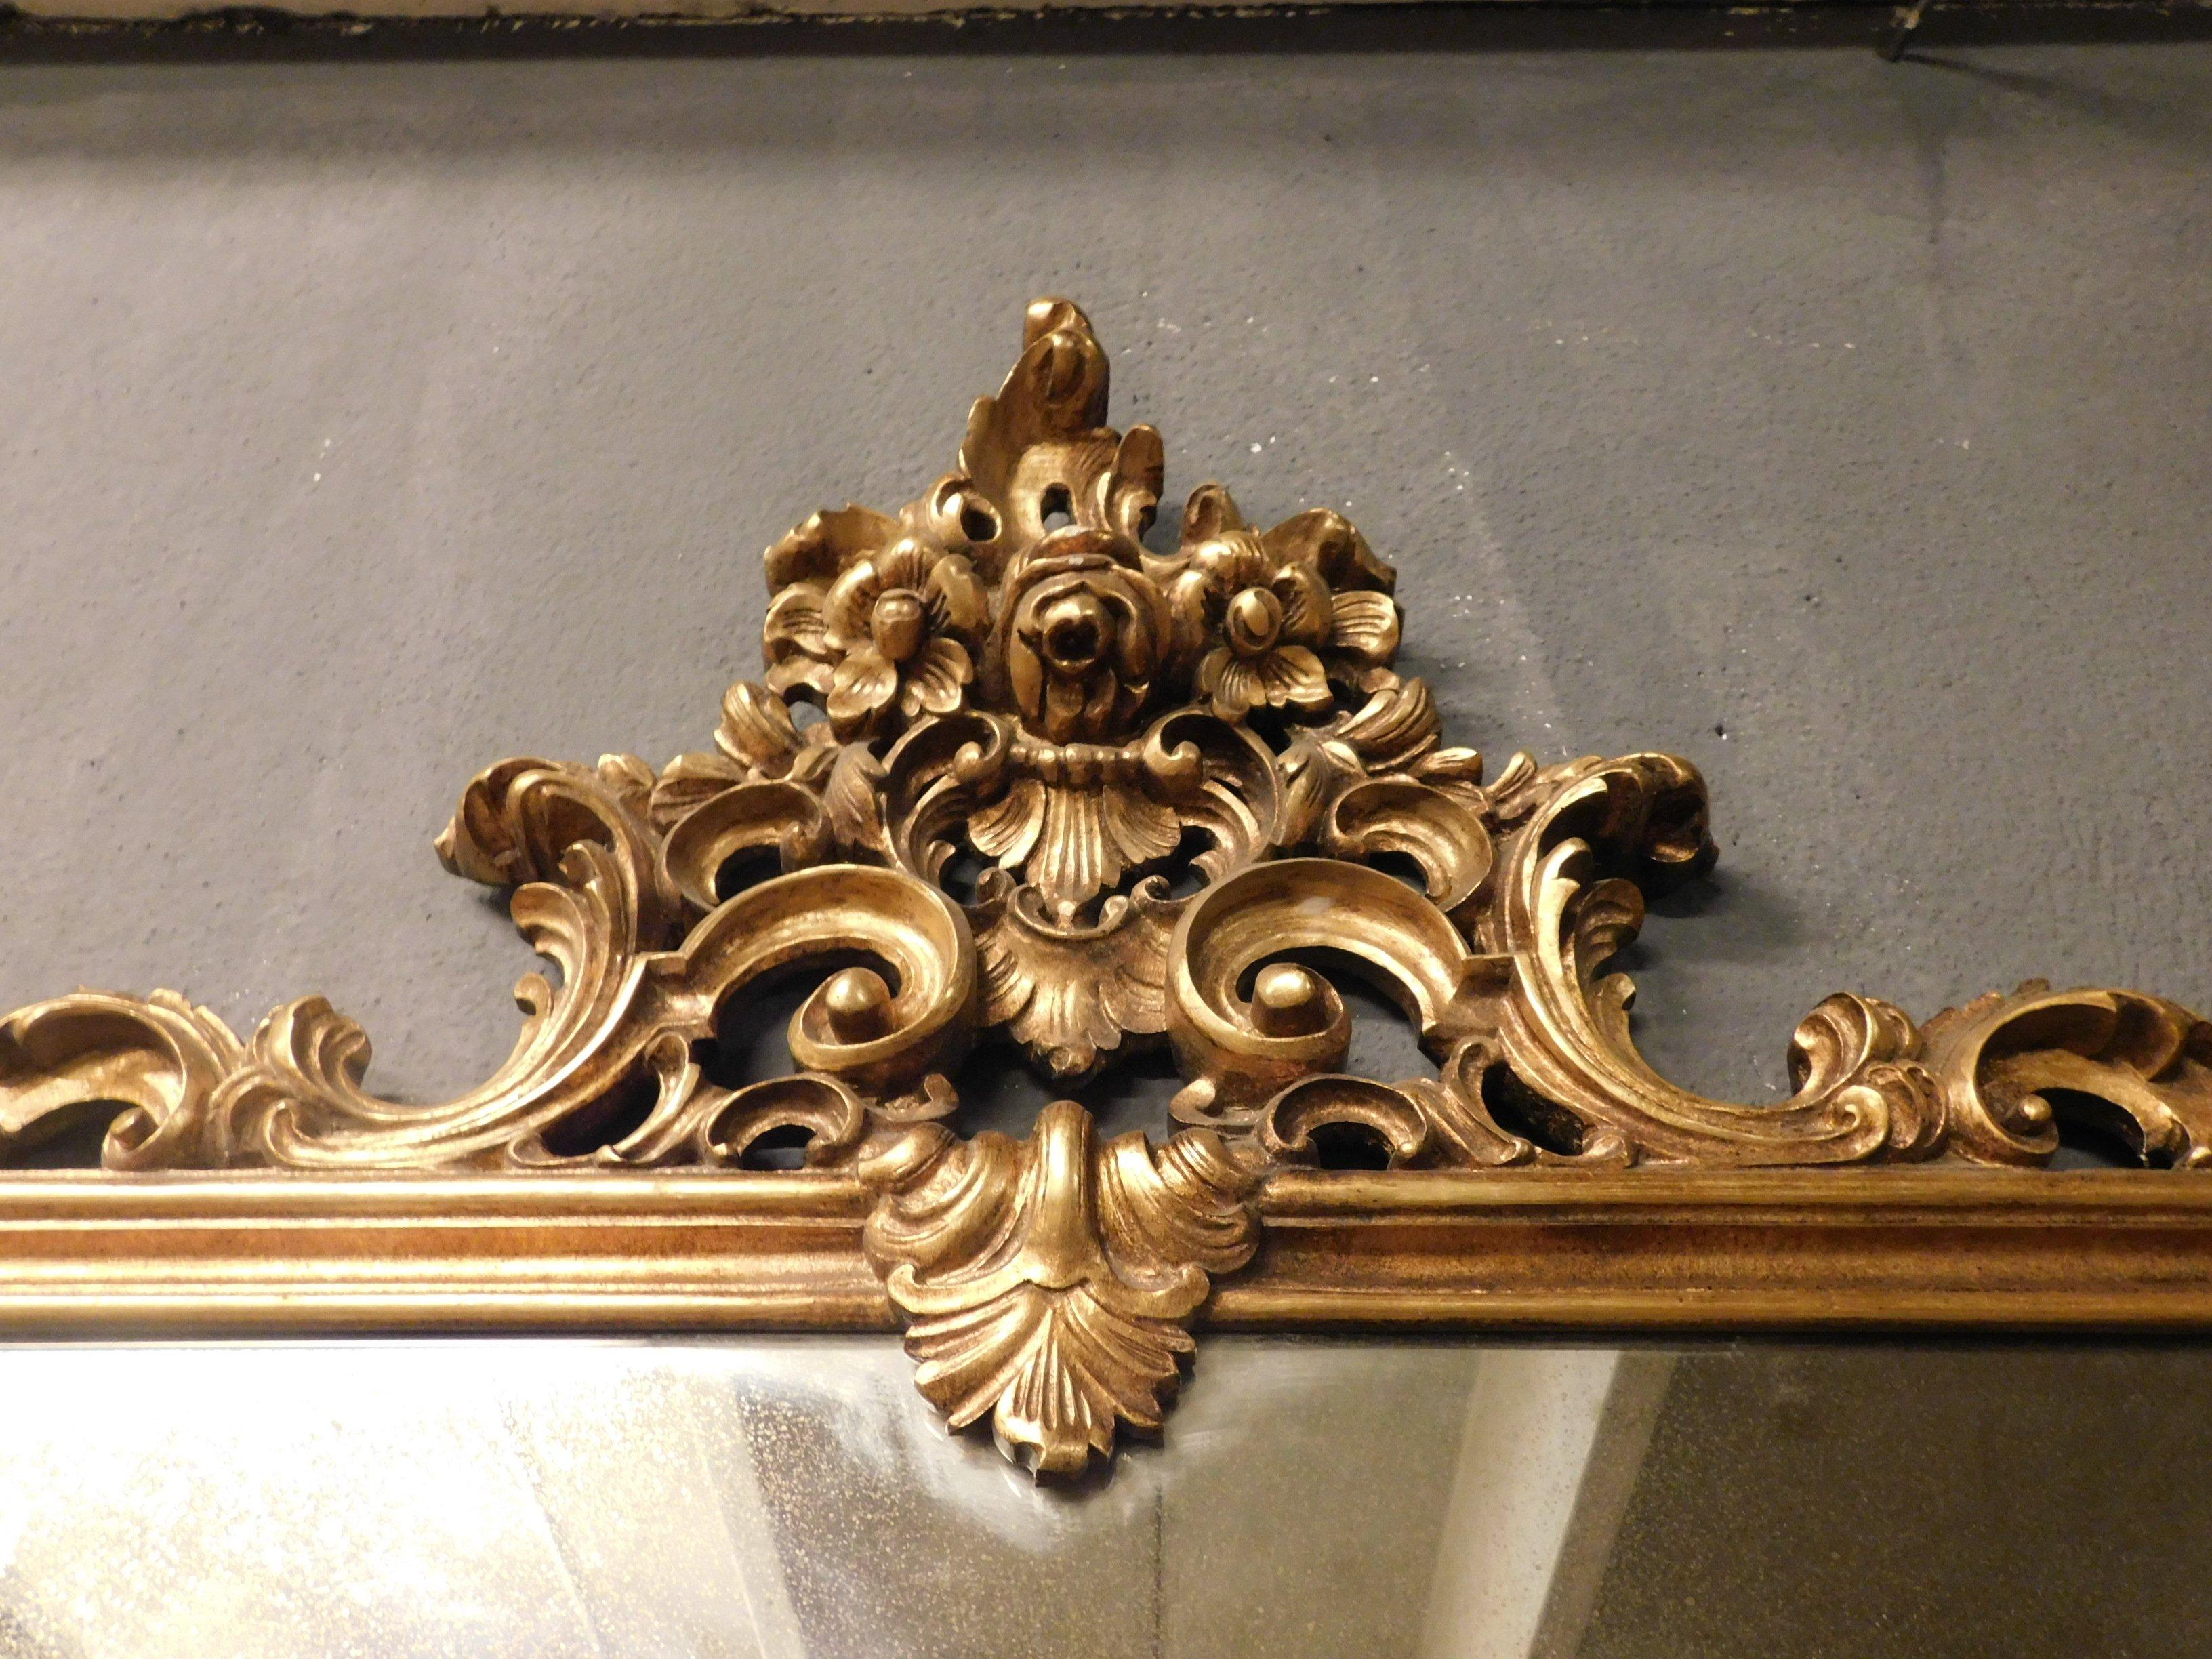 Wood Vintage Gilded and Richly Carved Mirror, Rectangular, 20th Century Italy